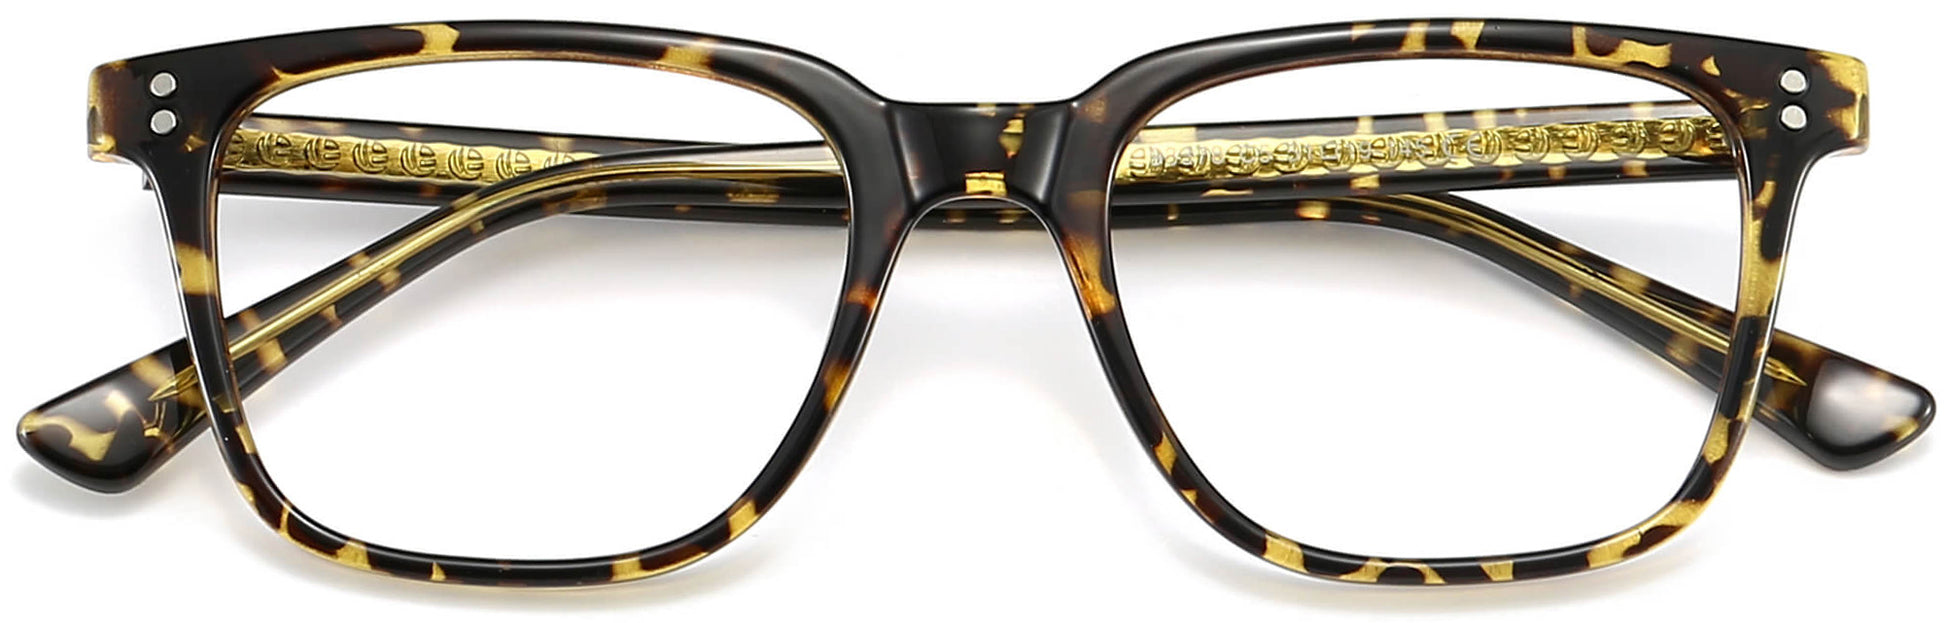 Kyson Square Tortoise Eyeglasses from ANRRI, closed view